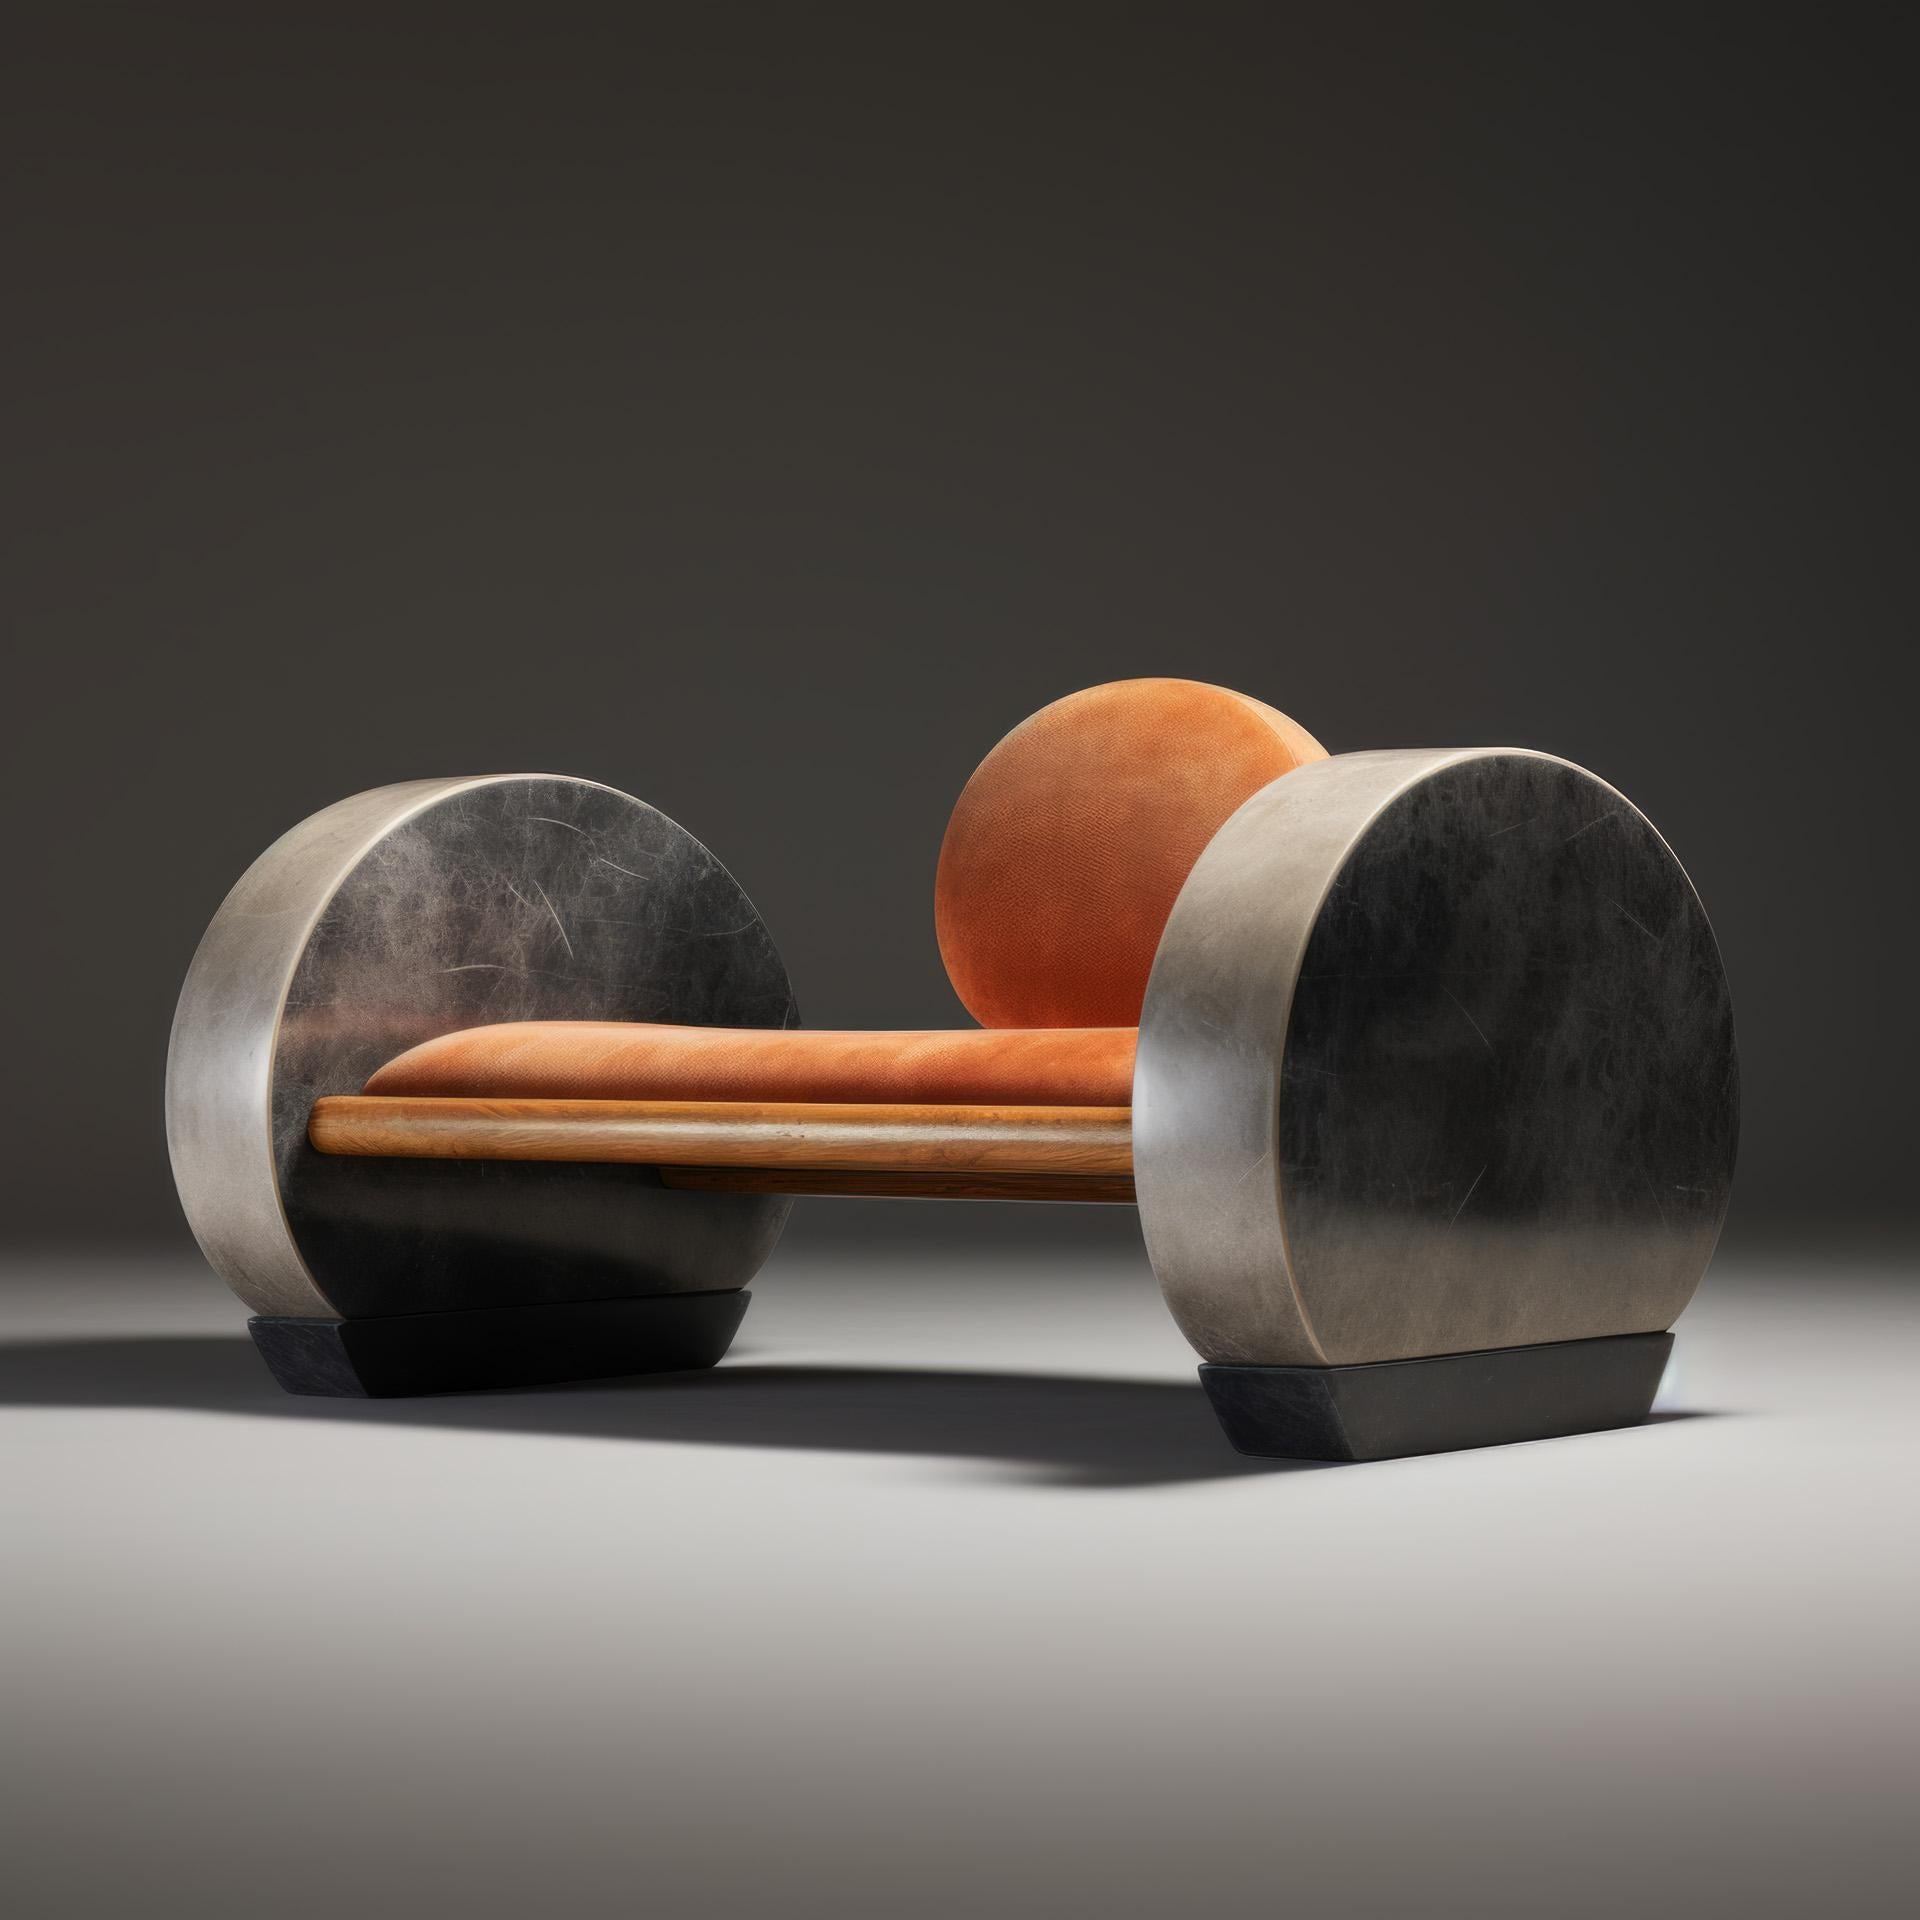 Dun Hou Lounge Chair by objective OBJECT Studio
Dimensions: D 81.5 x W 127 x H 96.5 cm 
Materials: Stainless steel, marble, wood, velvet, steel, foam.


objective OBJECT
an embodiment of our architectural ethos.

We represent an unwavering